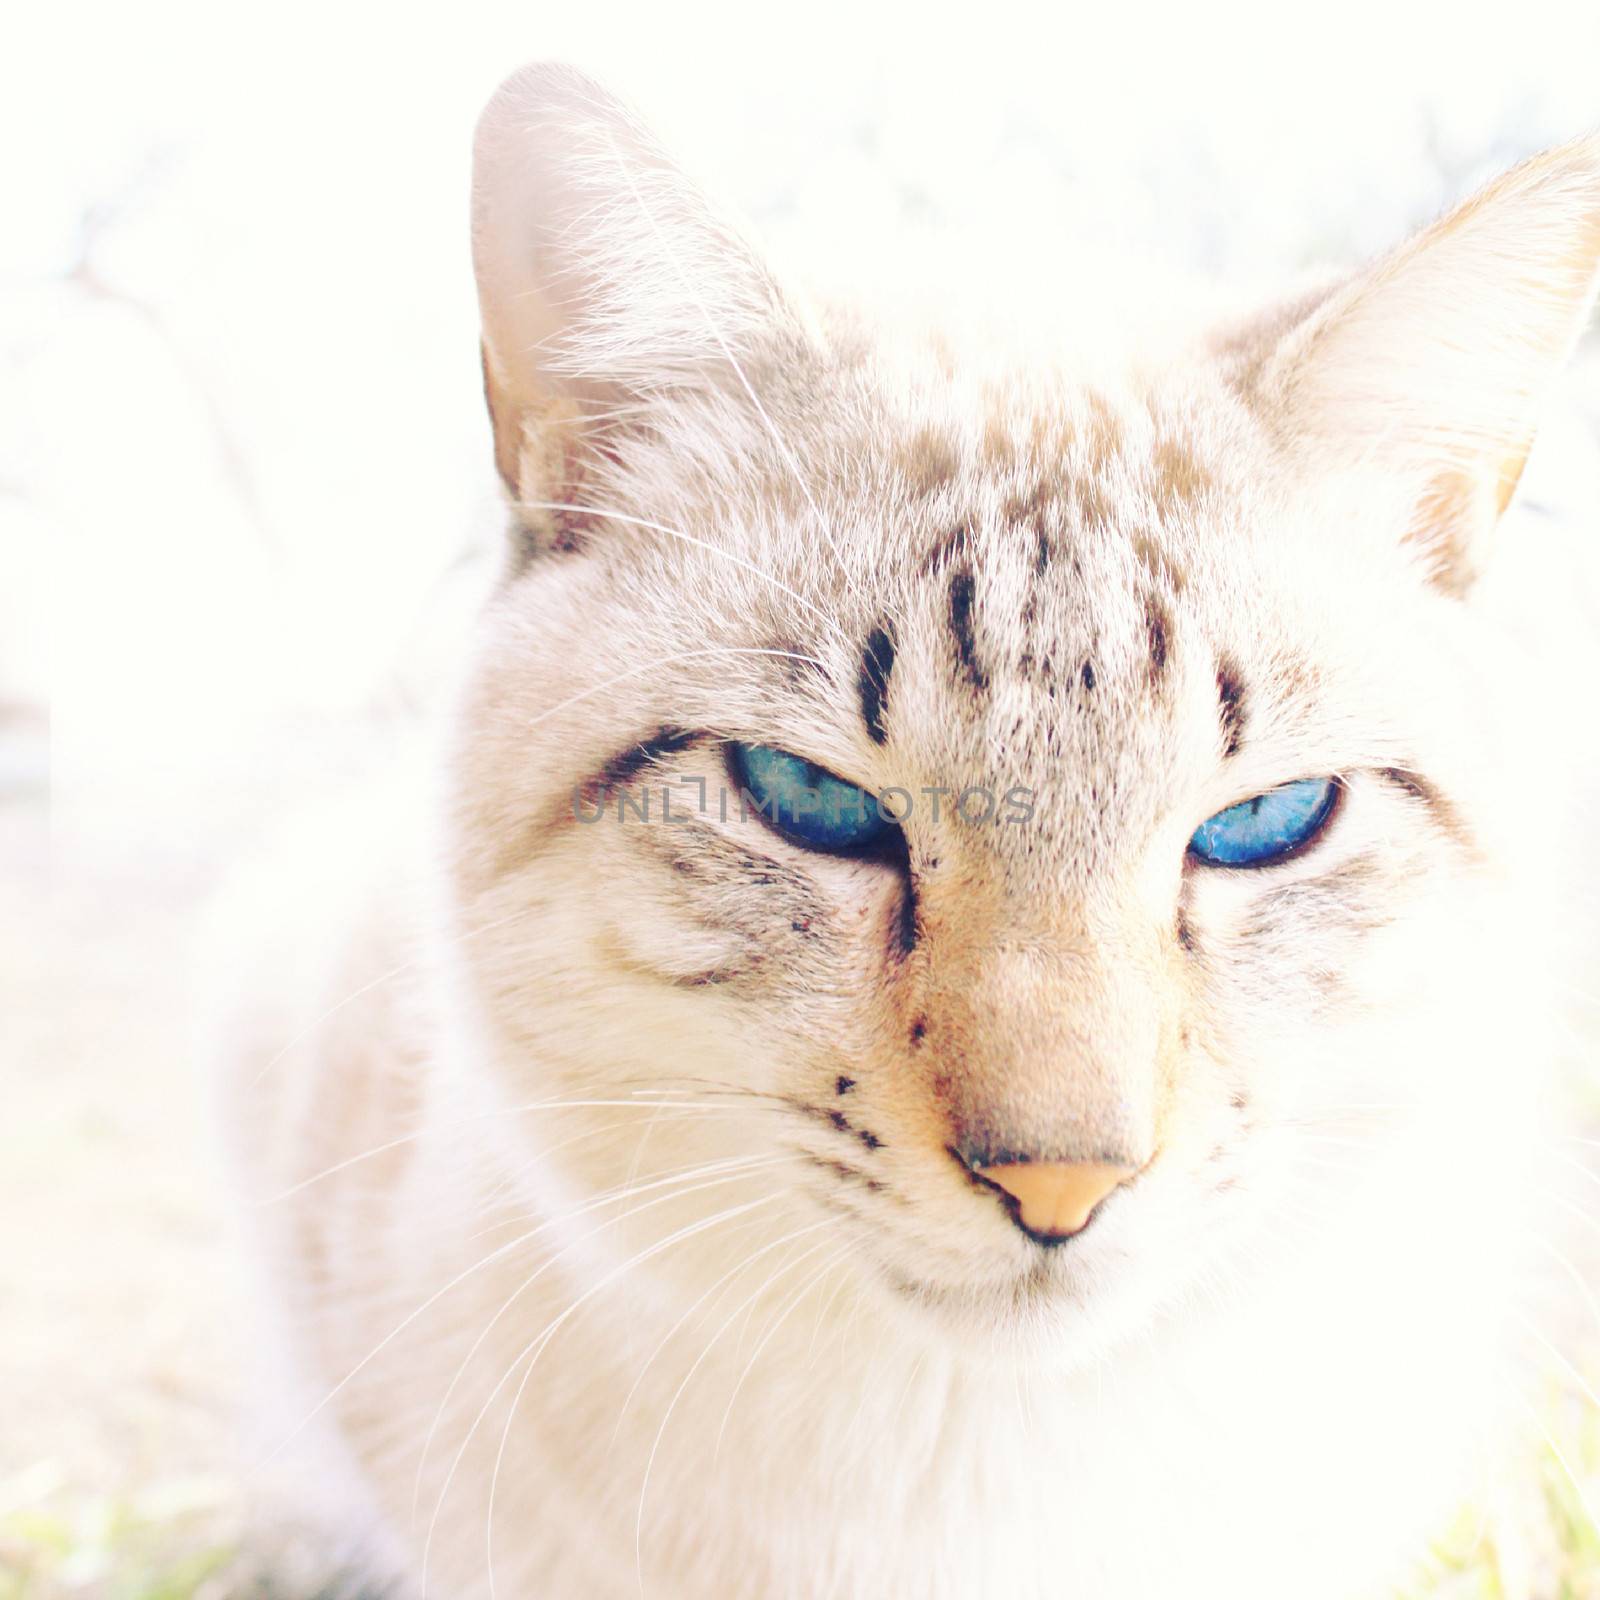 White cat with blue eyes by nuchylee